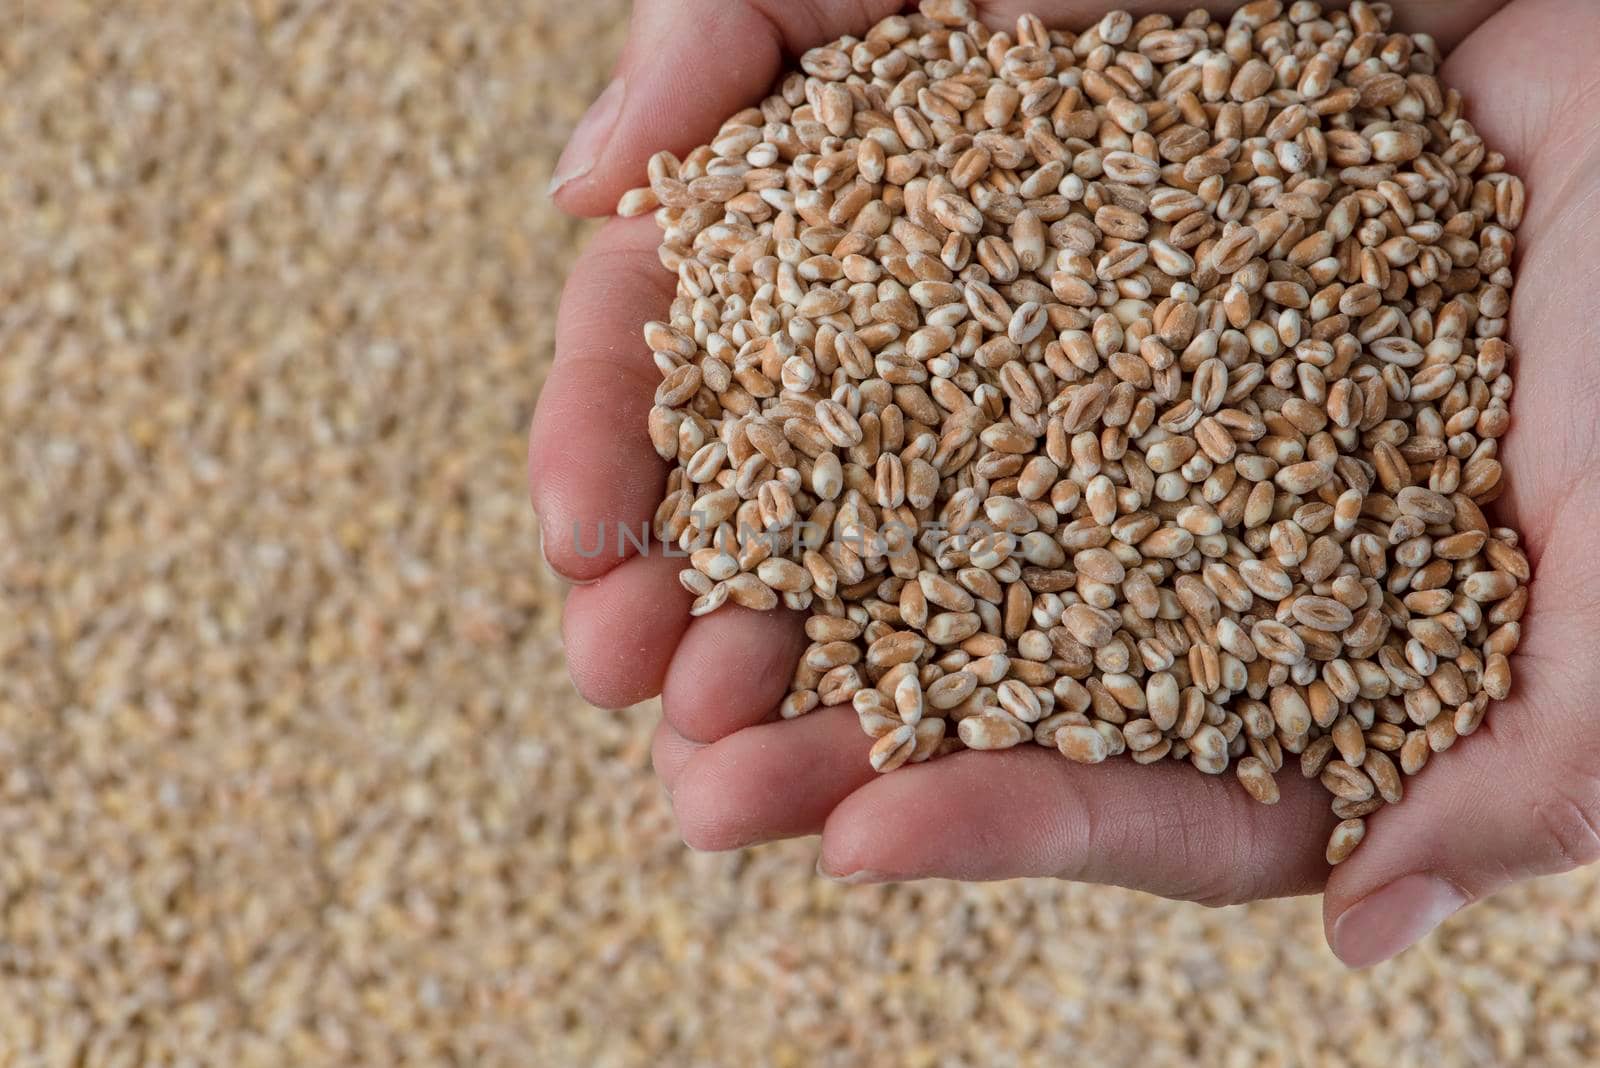 Wheat crisis, lack of grain and crops. Grains of wheat in the hand, against the background of the granary. The concept of the world food crisis. export and import